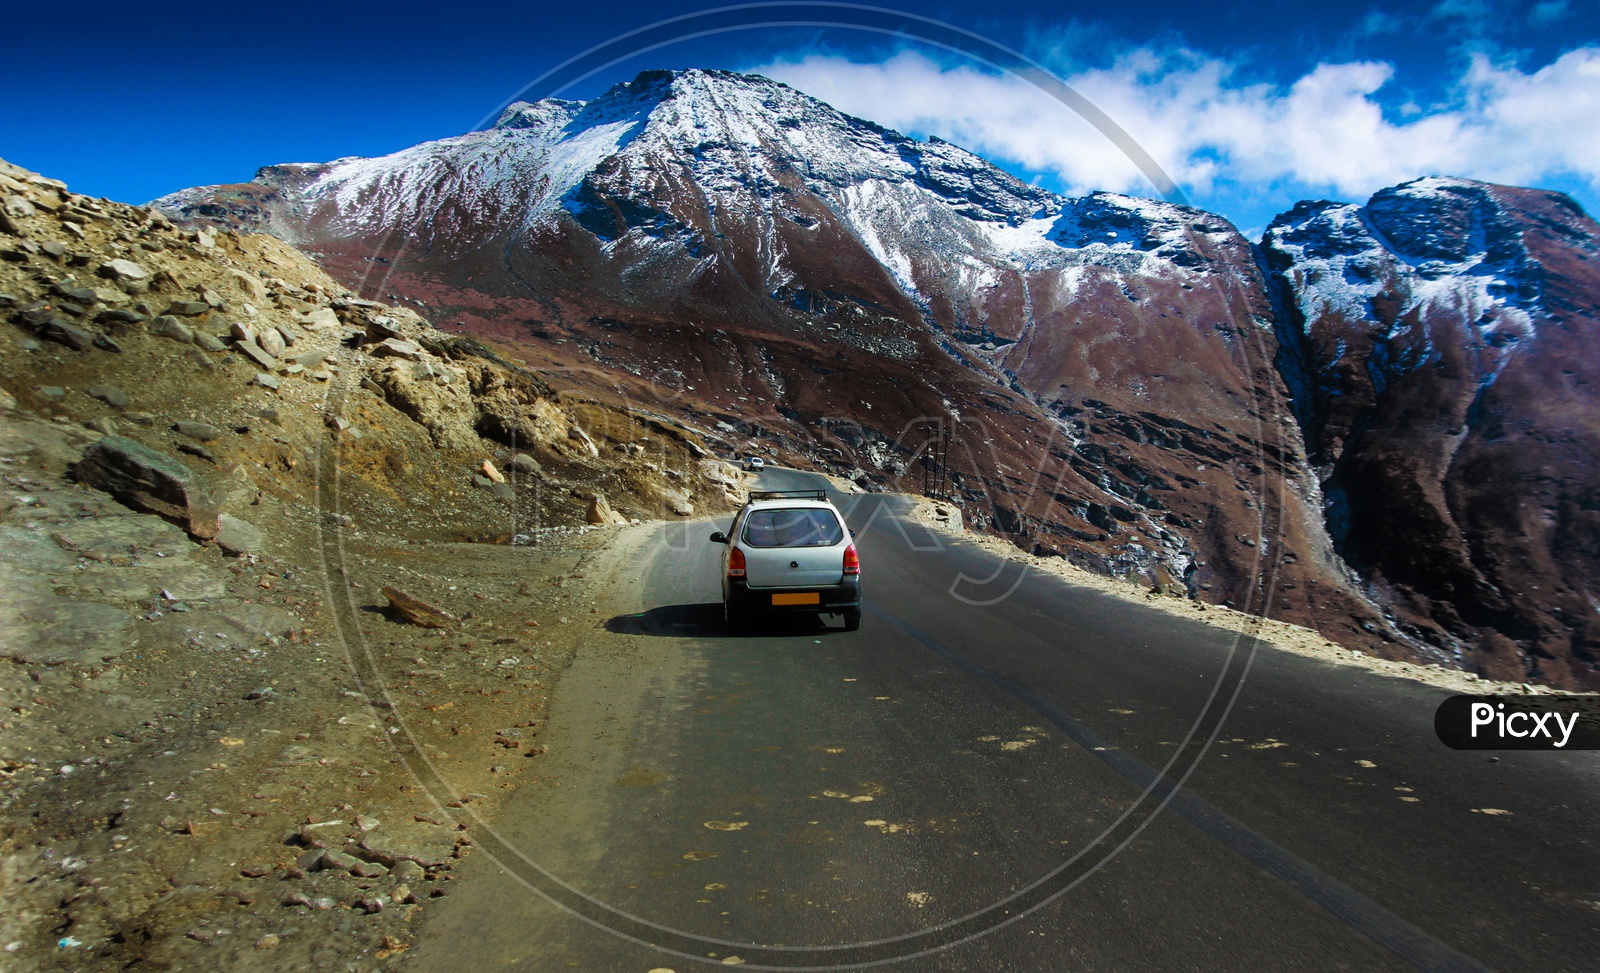 Car Driving In Hilly Highway With Green Pasture And Blue Sky On The Way To Himalaya From The Road,Manali Tourism Himachal Leh Ladakh, India